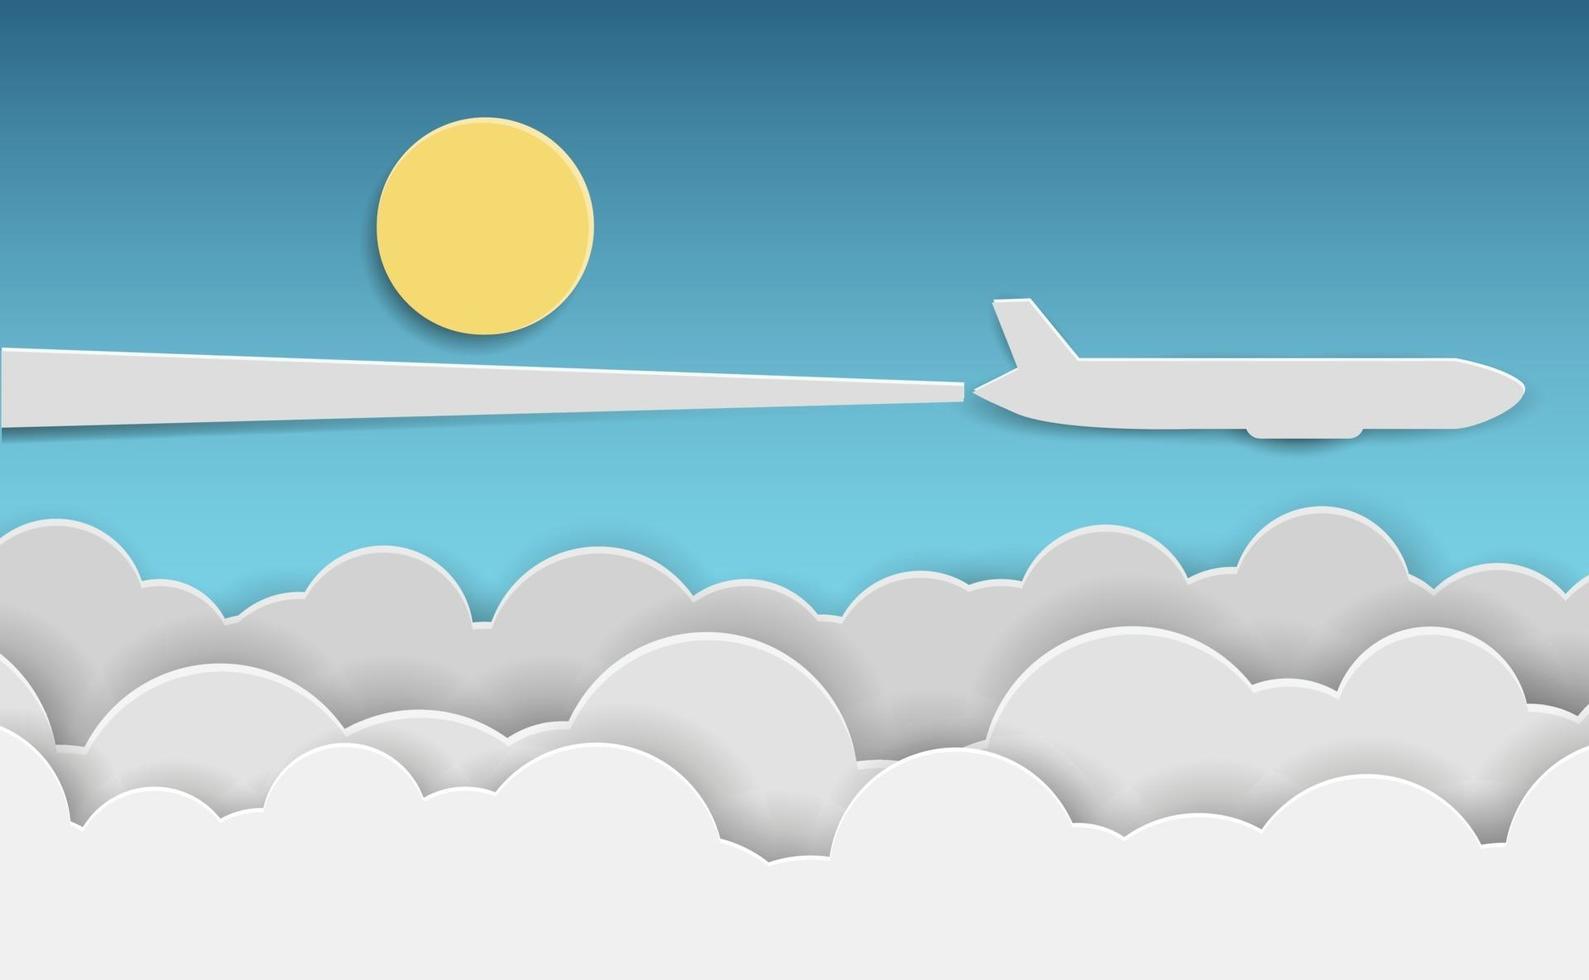 Paper airplane flying above clouds in blue sky vector